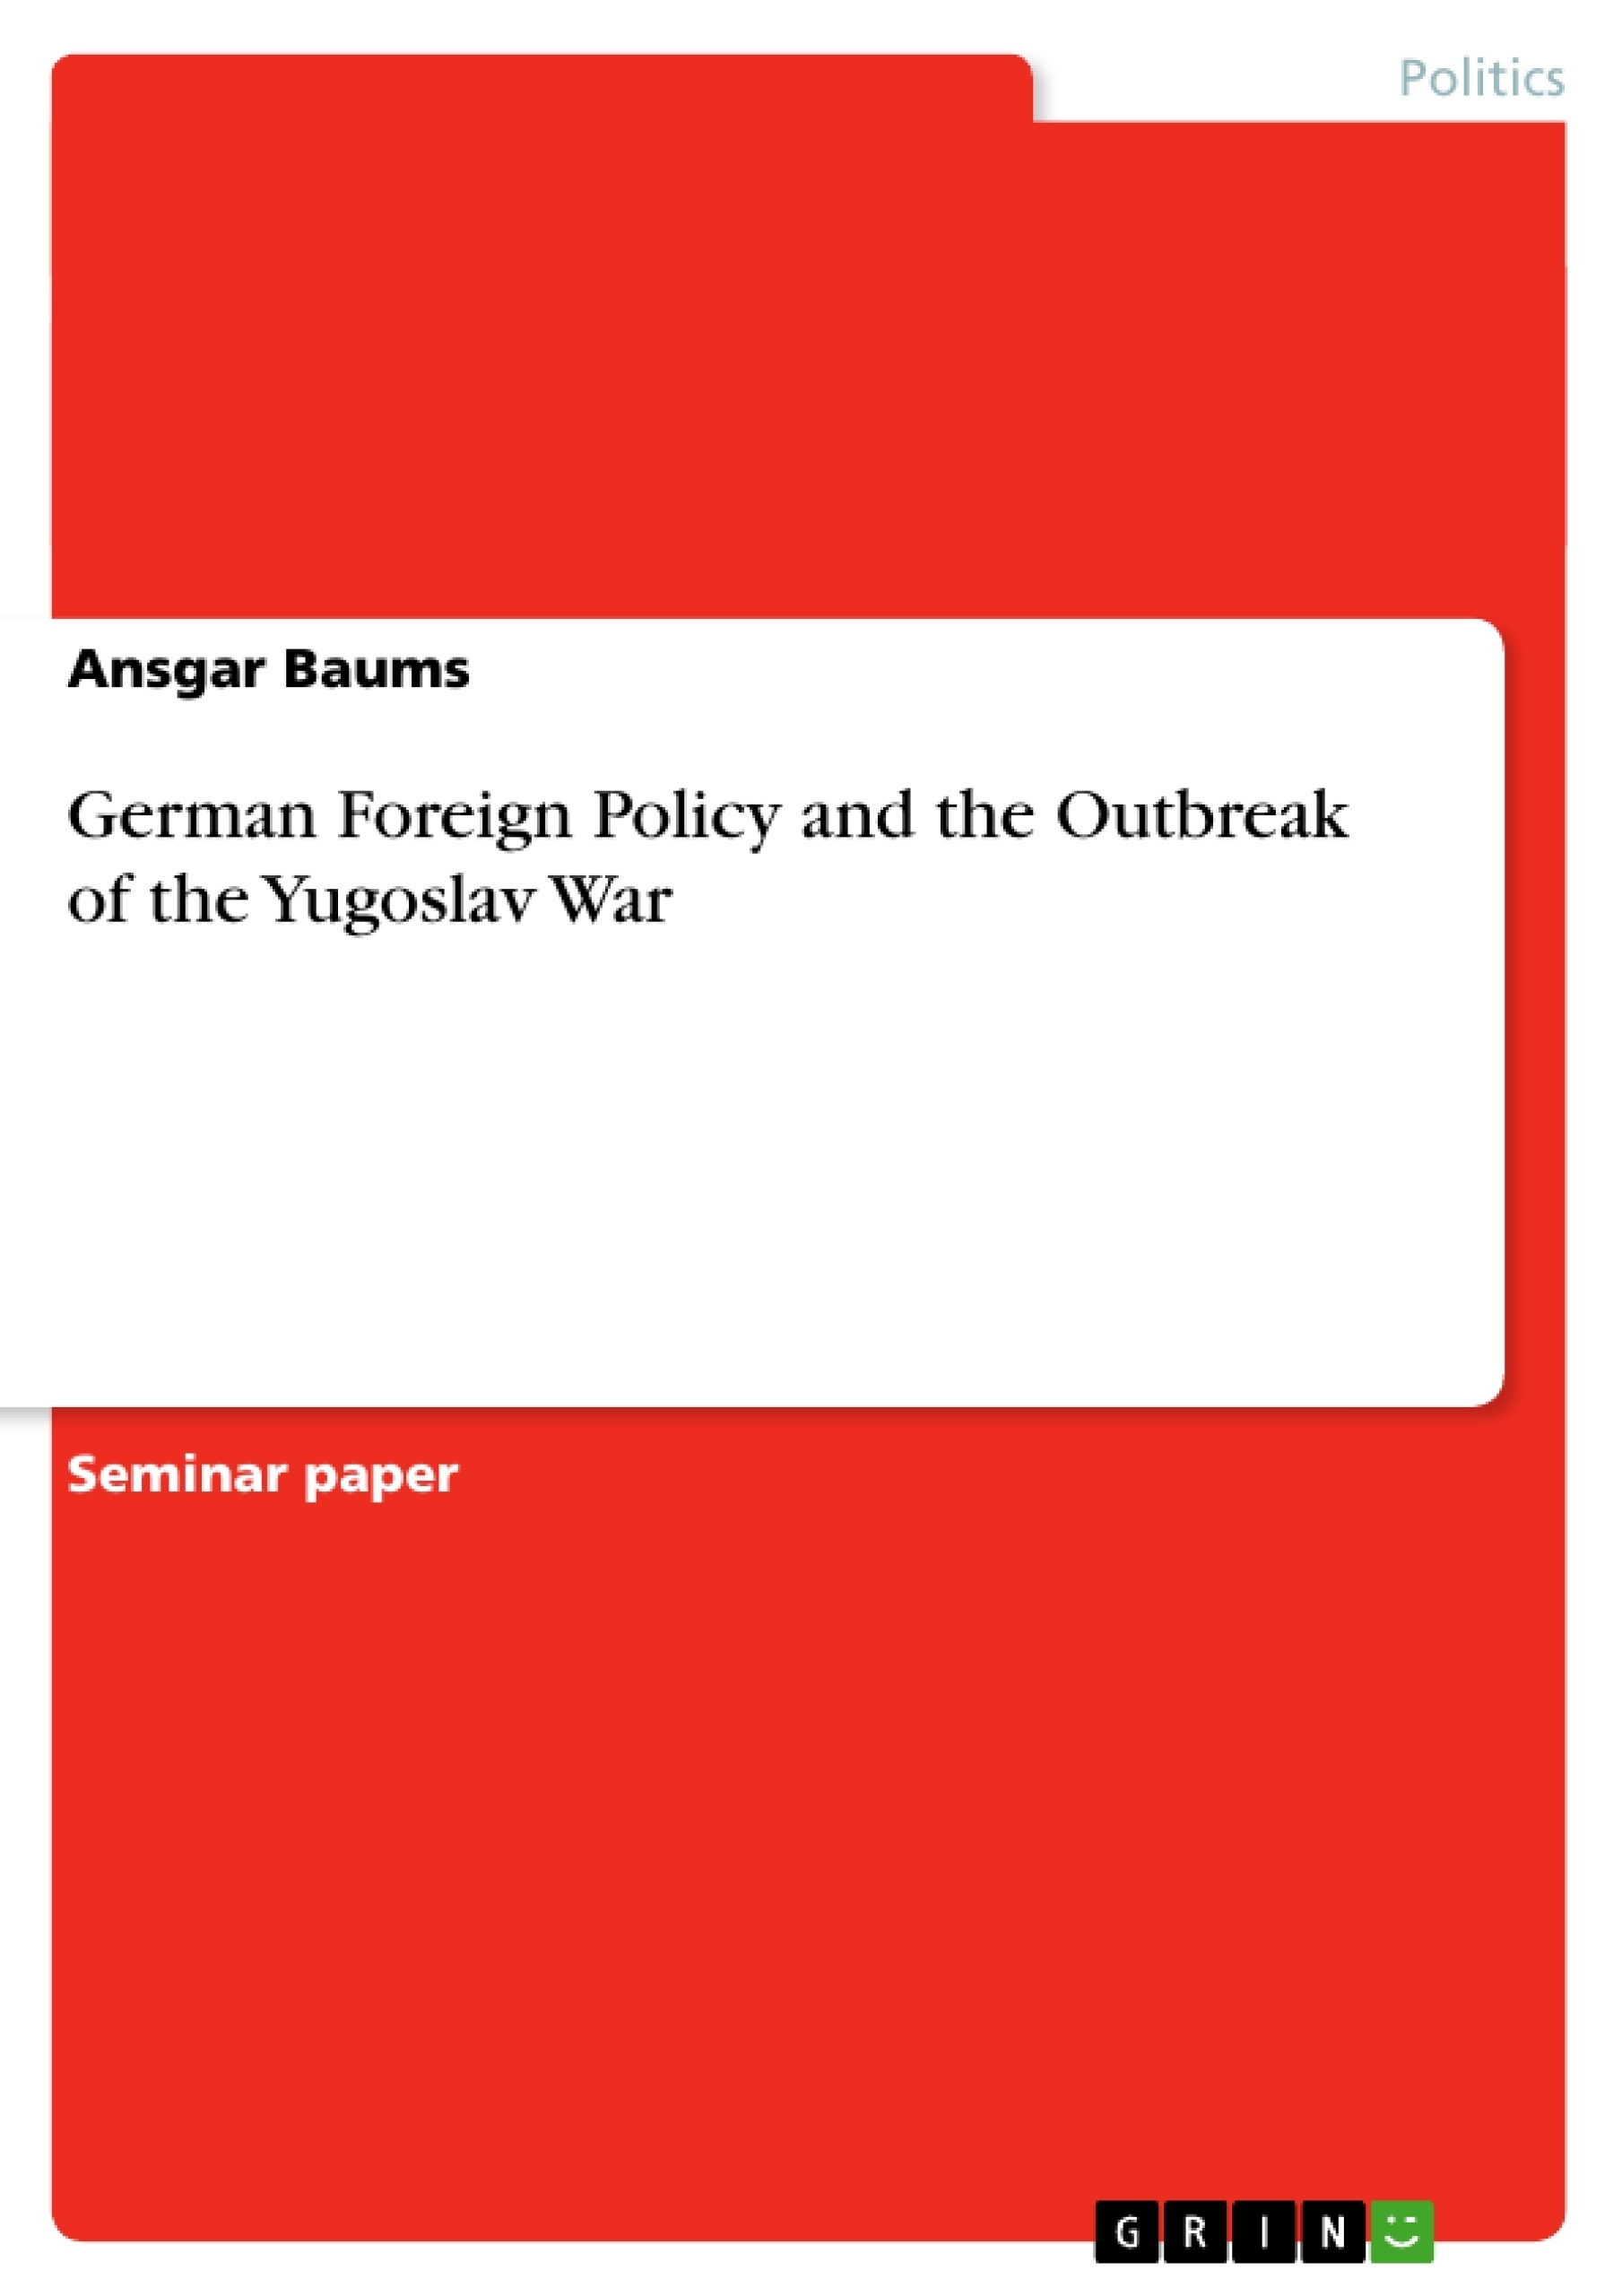 Title: German Foreign Policy and the Outbreak of the Yugoslav War